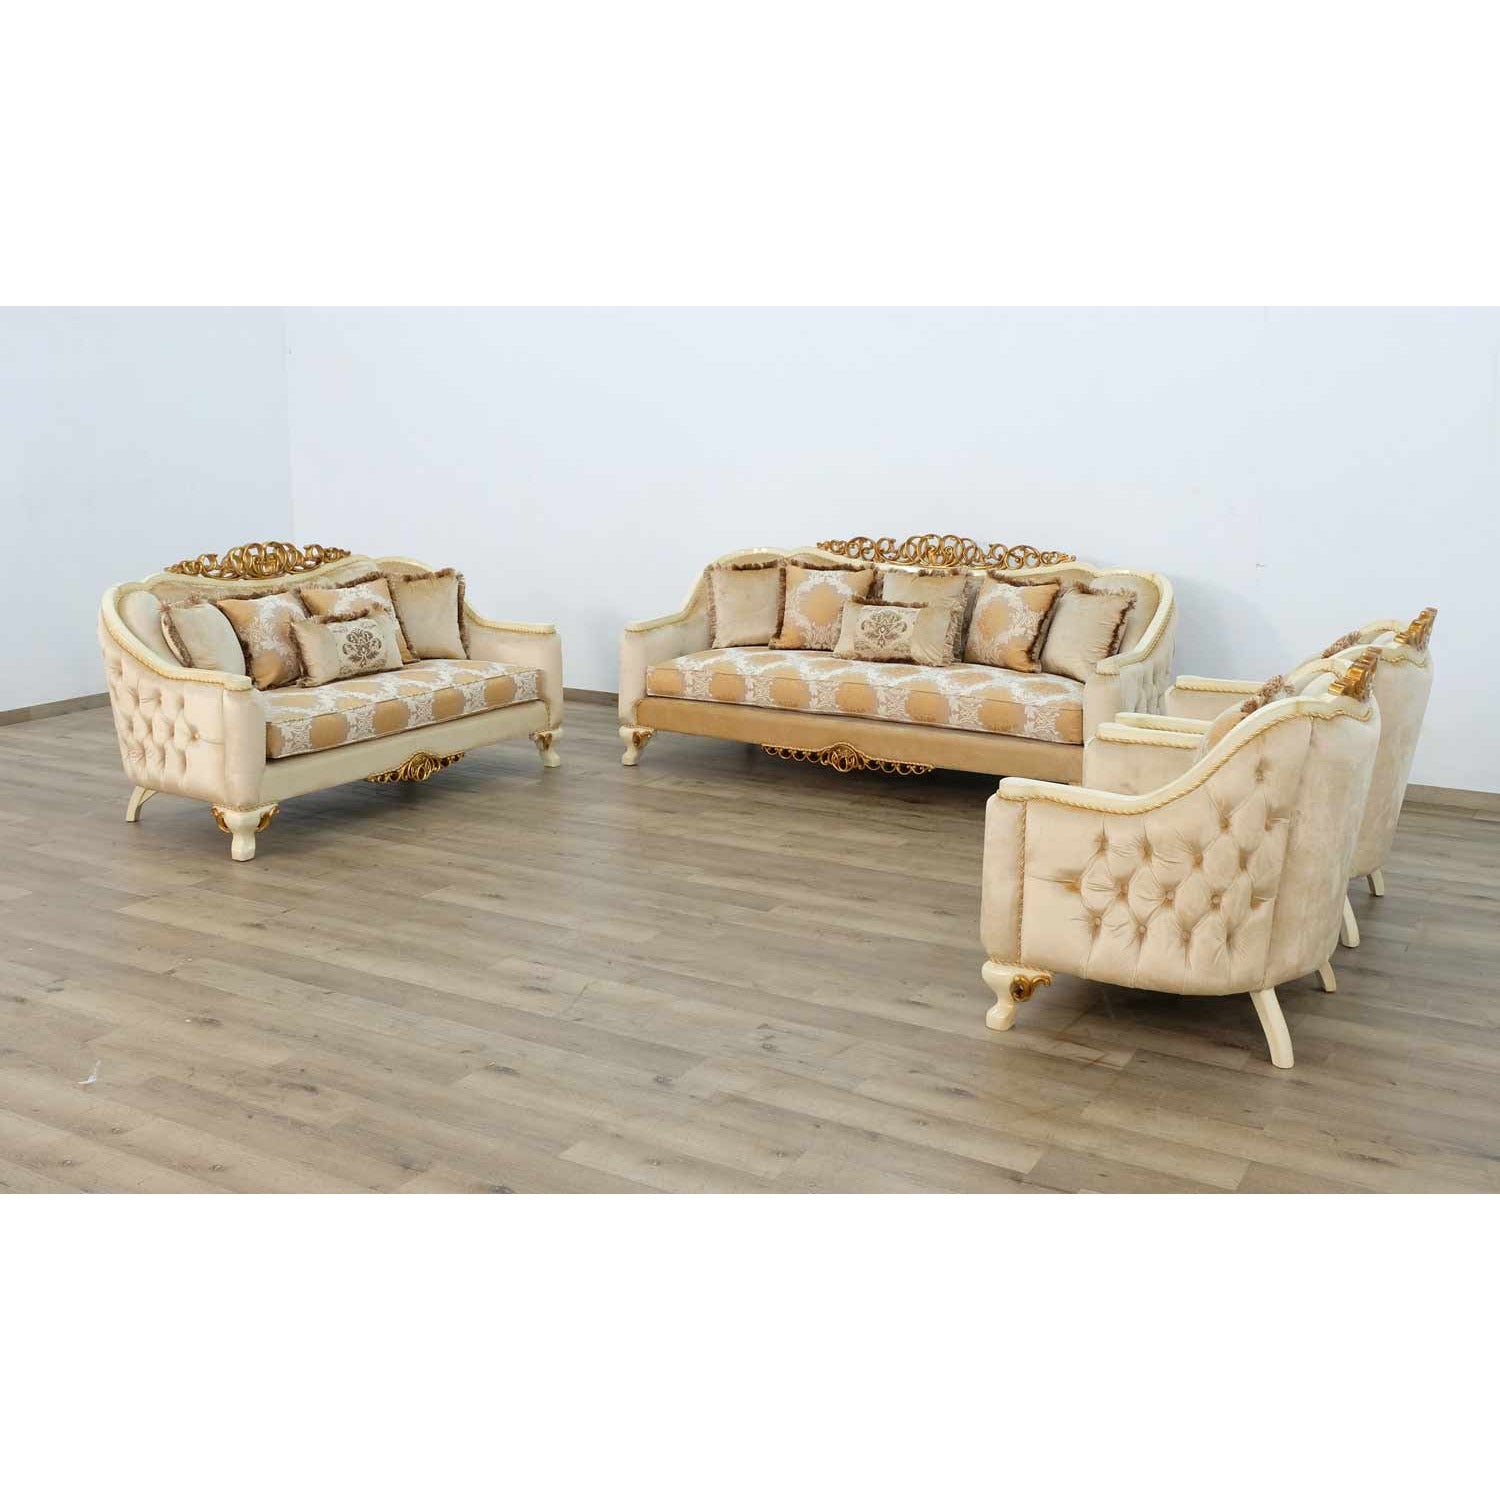 European Furniture - Angelica 4 Piece Living Room Set in Brown & Gold - 45352-4SET - New Star Living